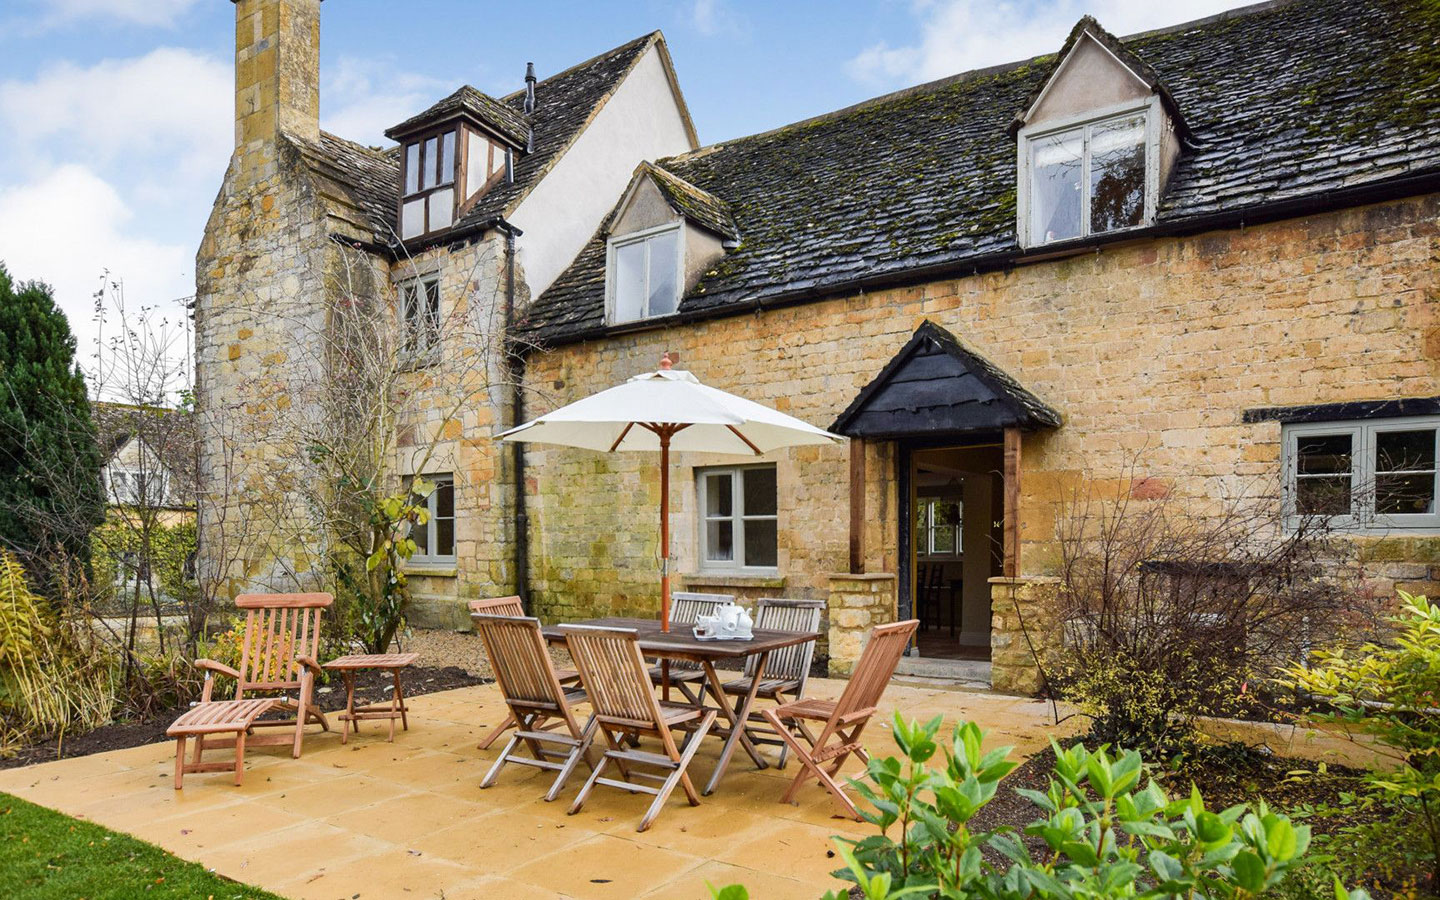 Archers holiday cottage at Sudeley Castle